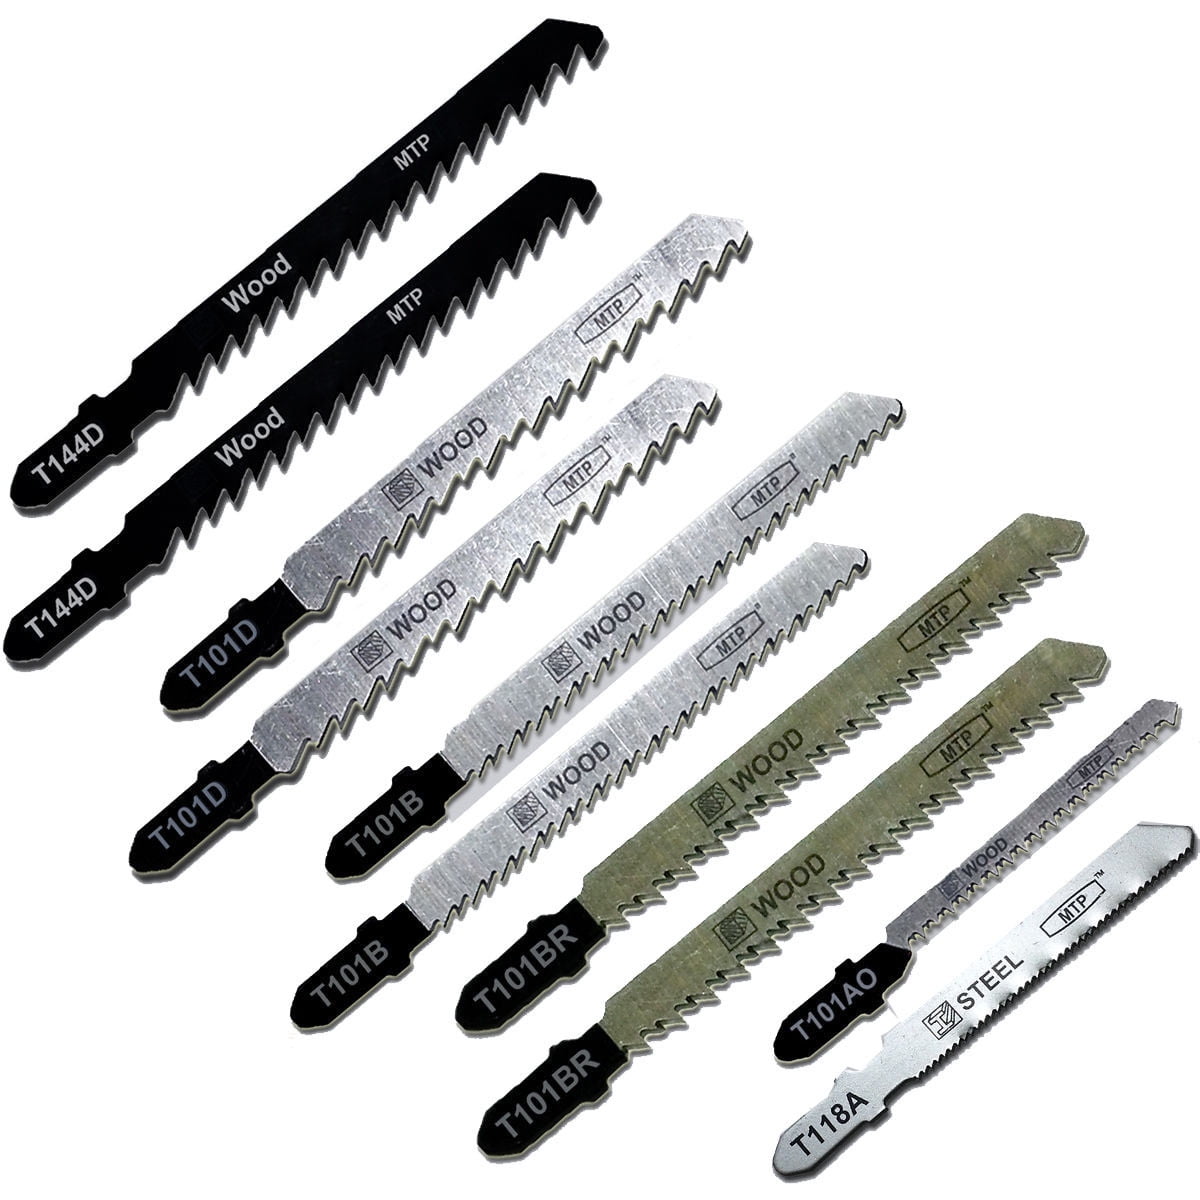 BOSCH 10 PIECE ASSORTMENT JIG SAW BLADES TO FIT BLACK AND DECKER AND SIMILAR 